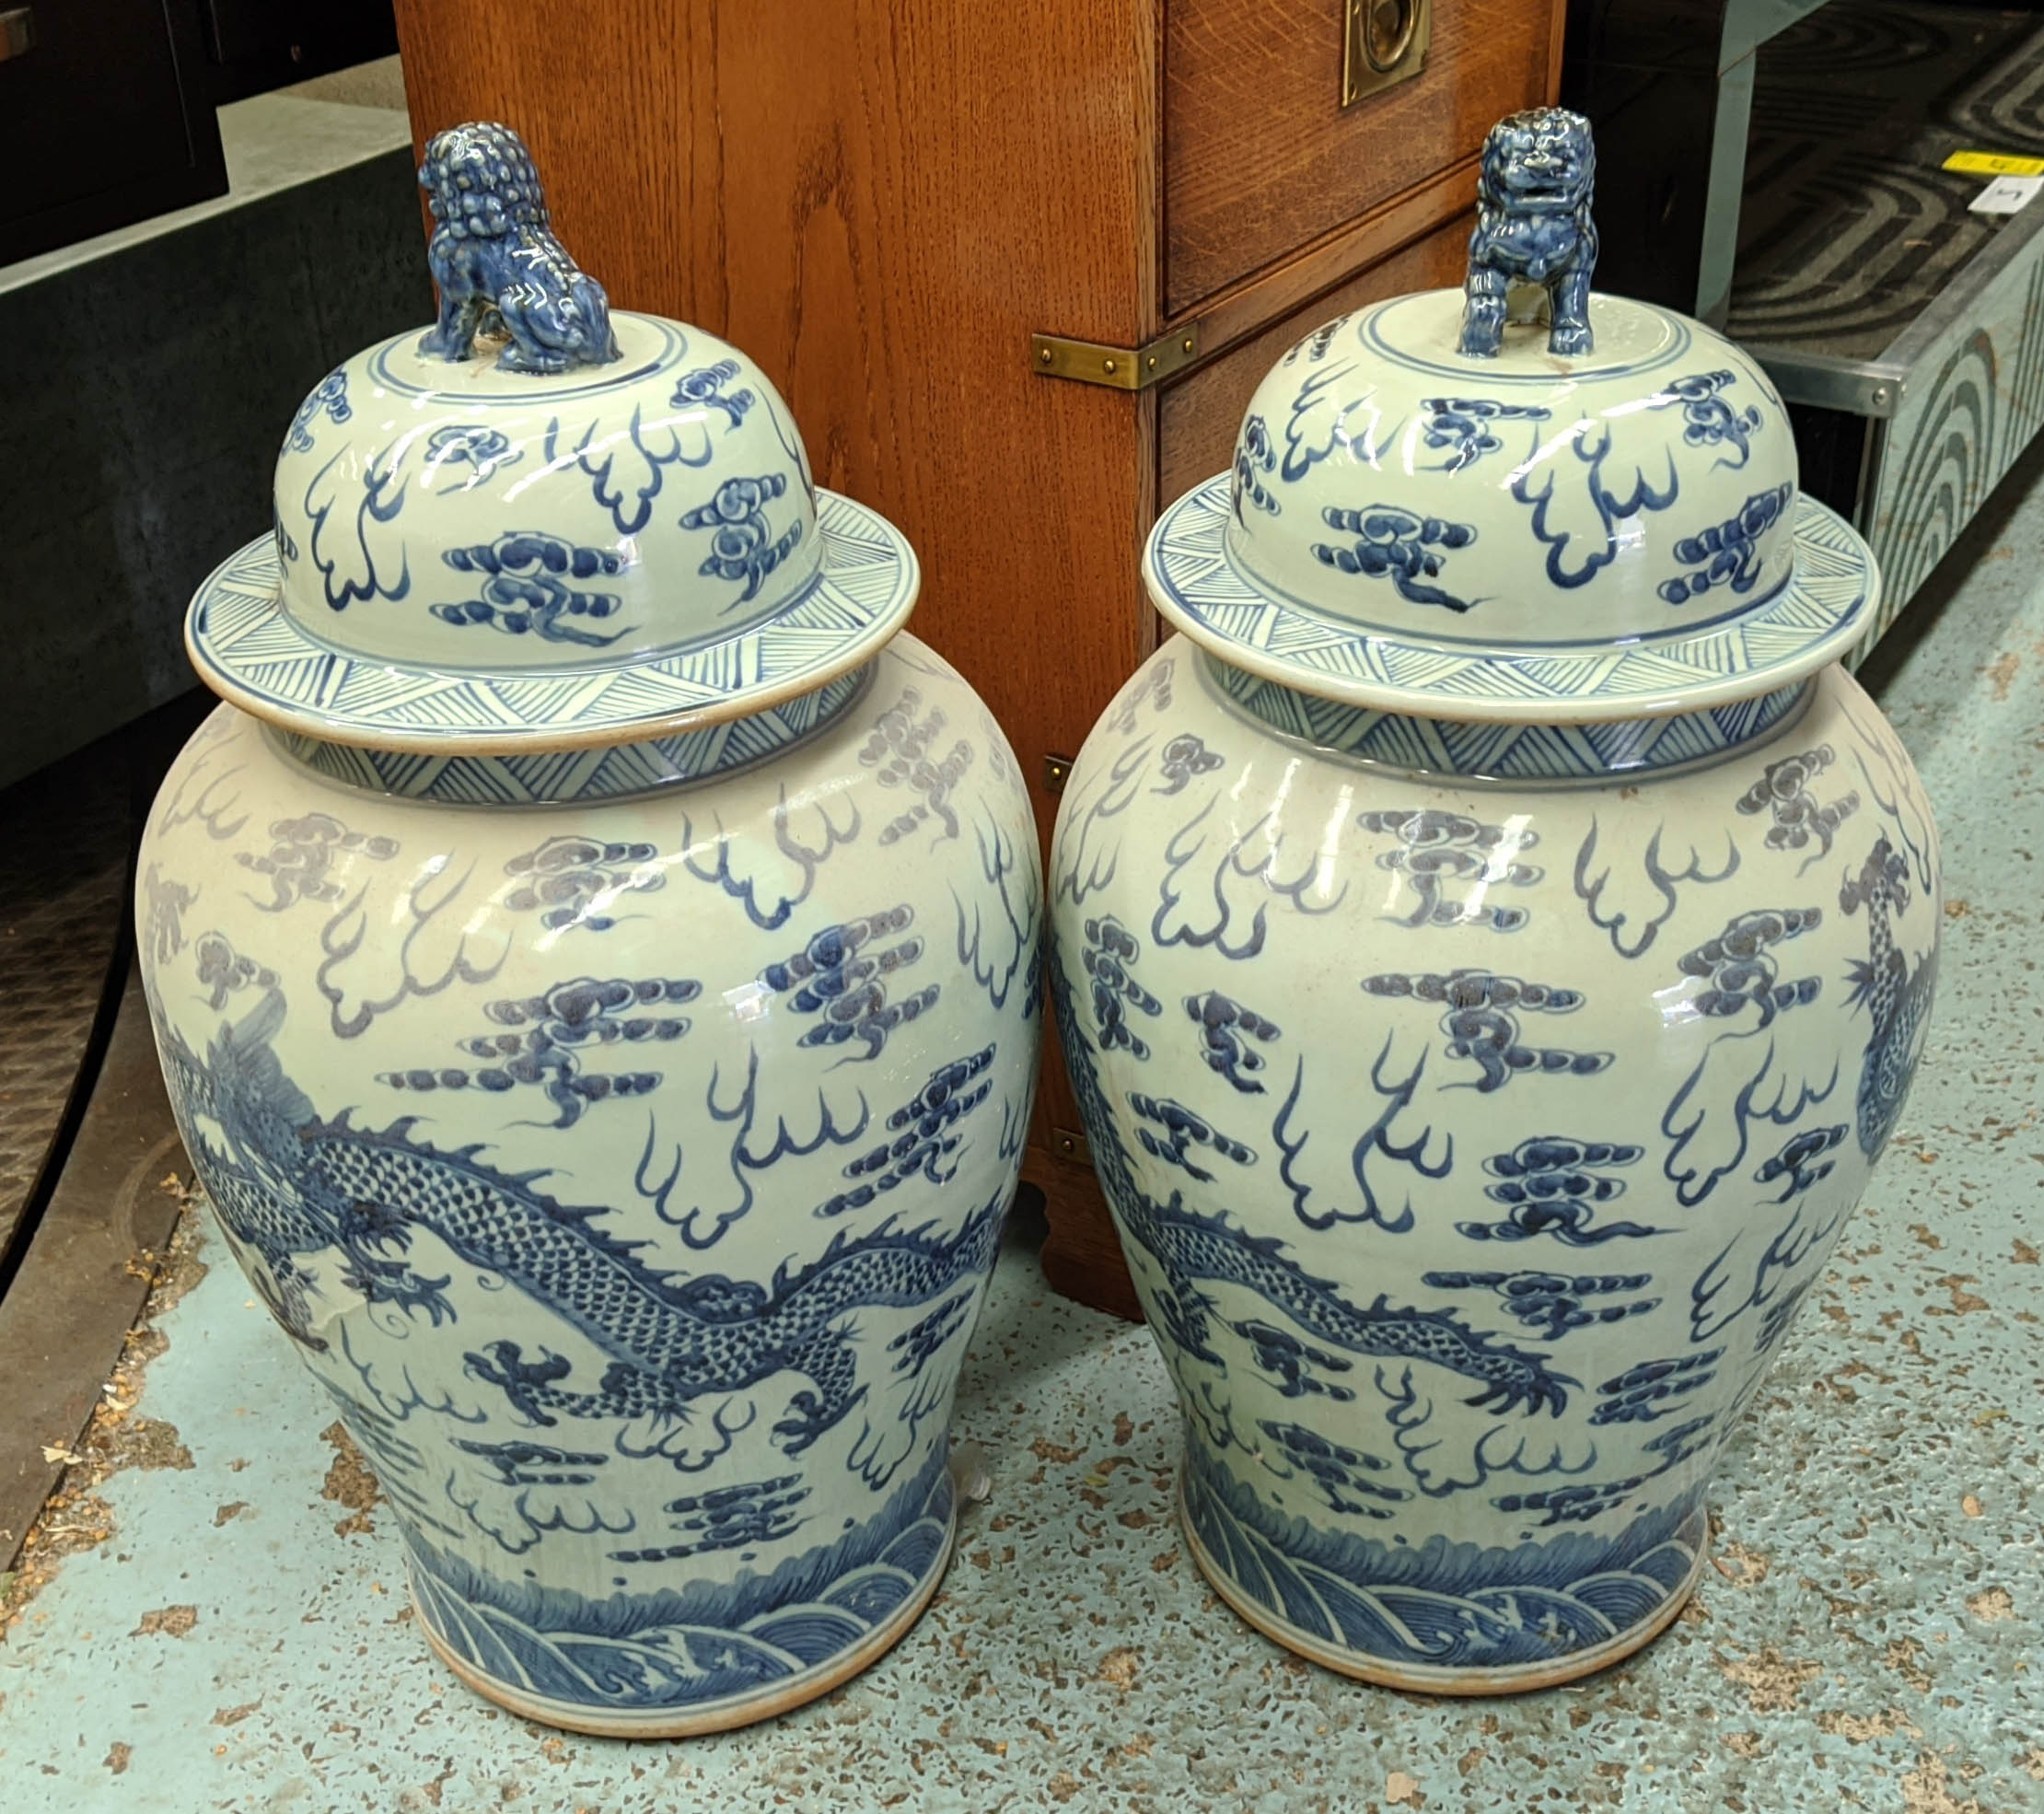 TEMPLE JARS, a pair, Chinese export style, blue and white ceramic. (2)